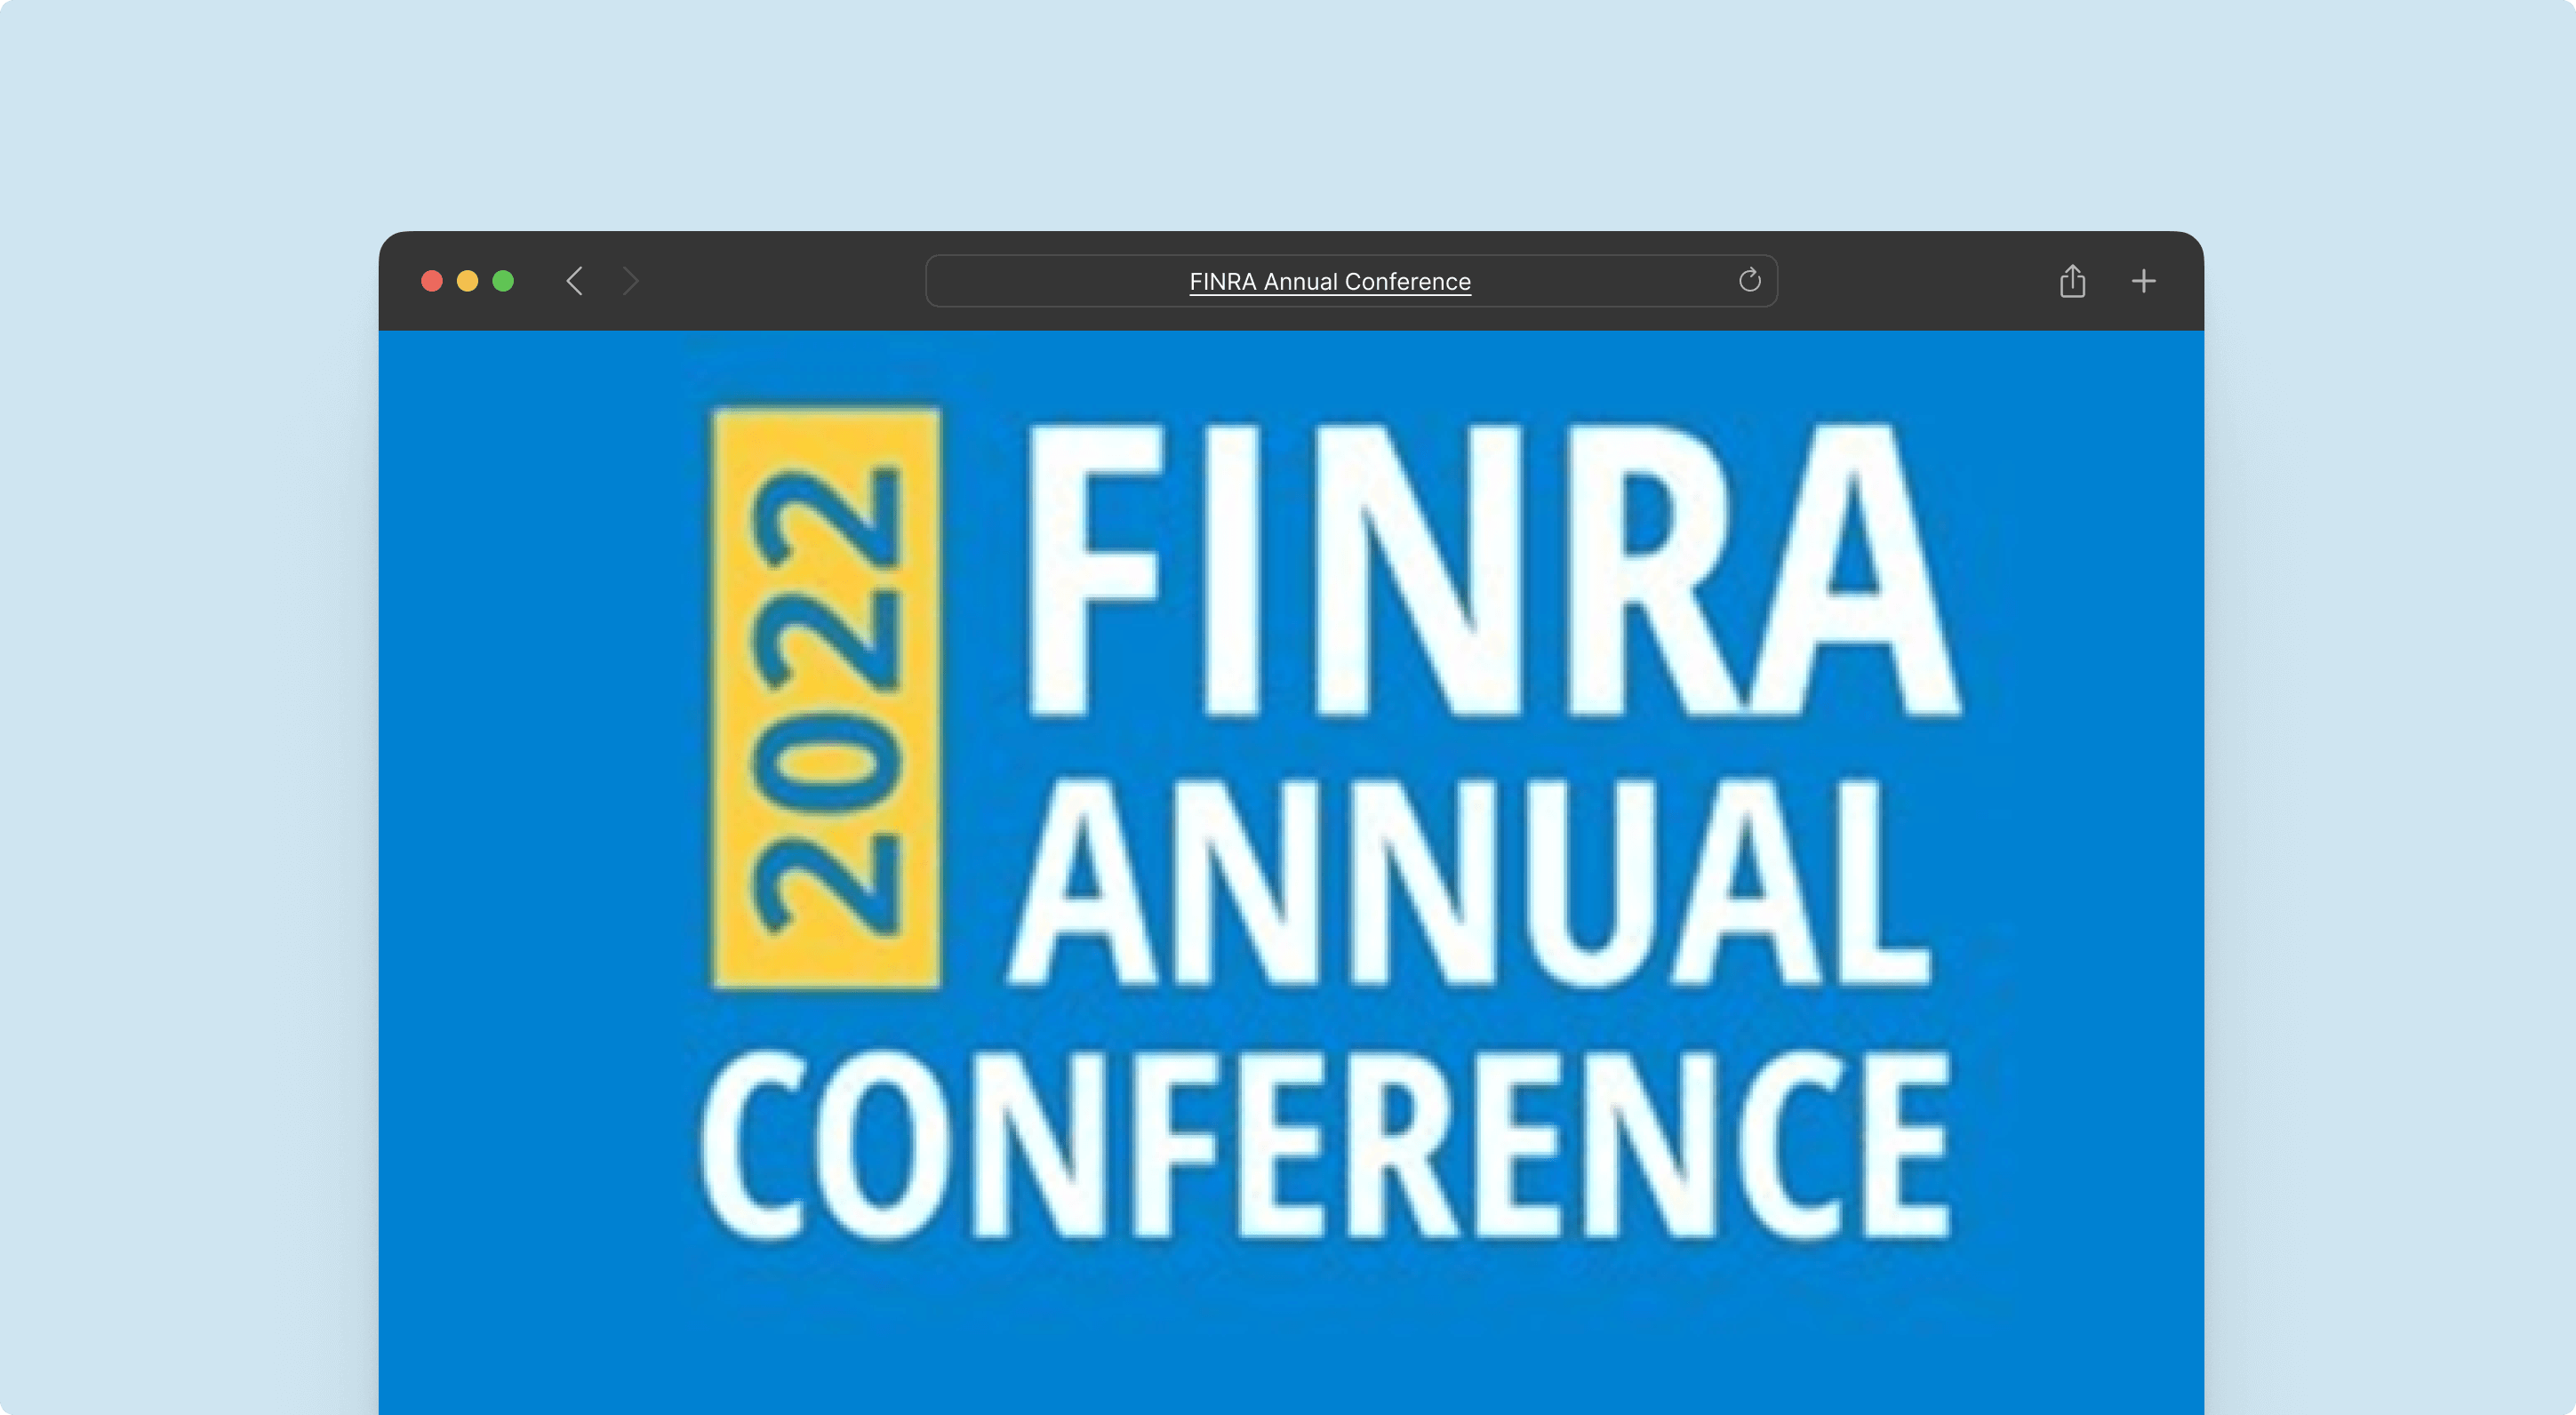 Finra annual conference